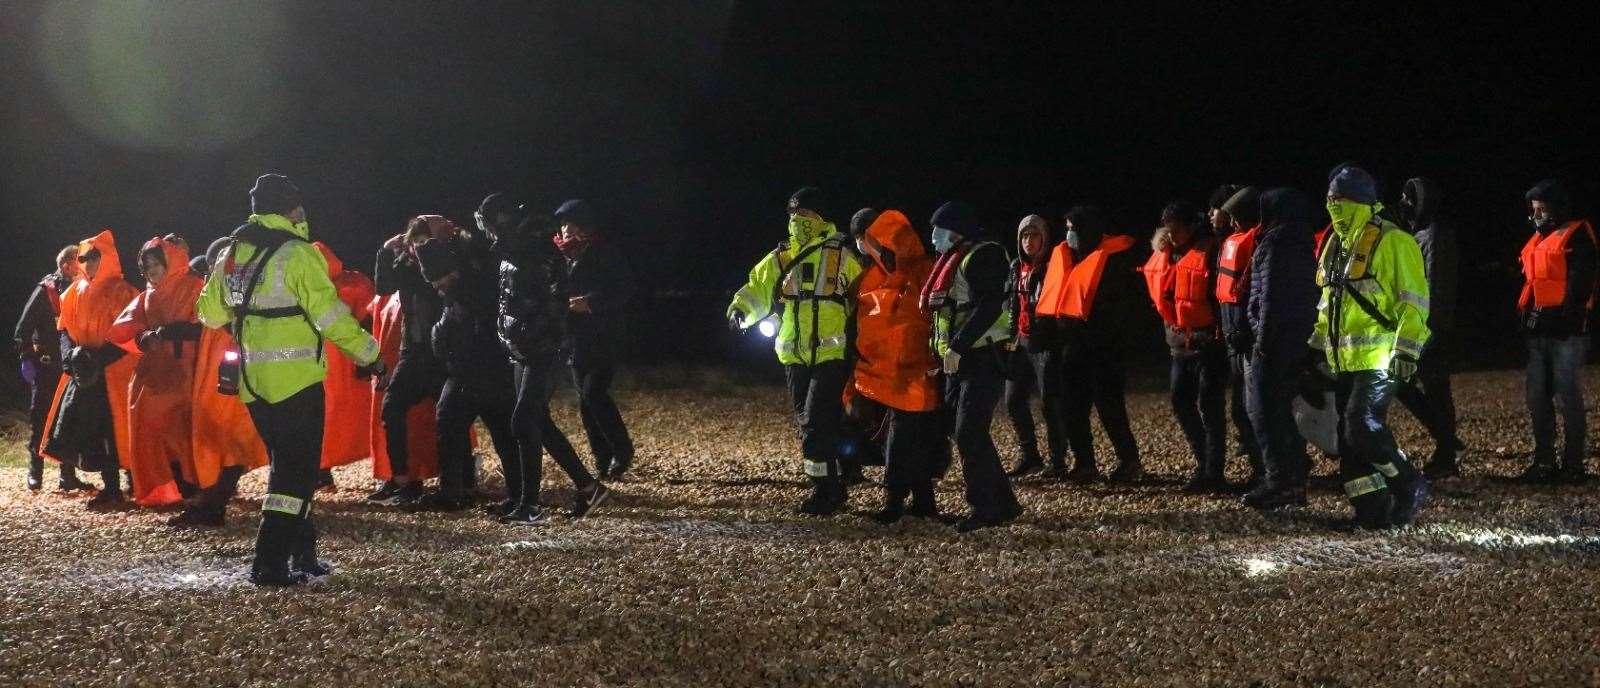 Asylum seekers including young children are rescued and land at Dungeness Picture: UKNIP